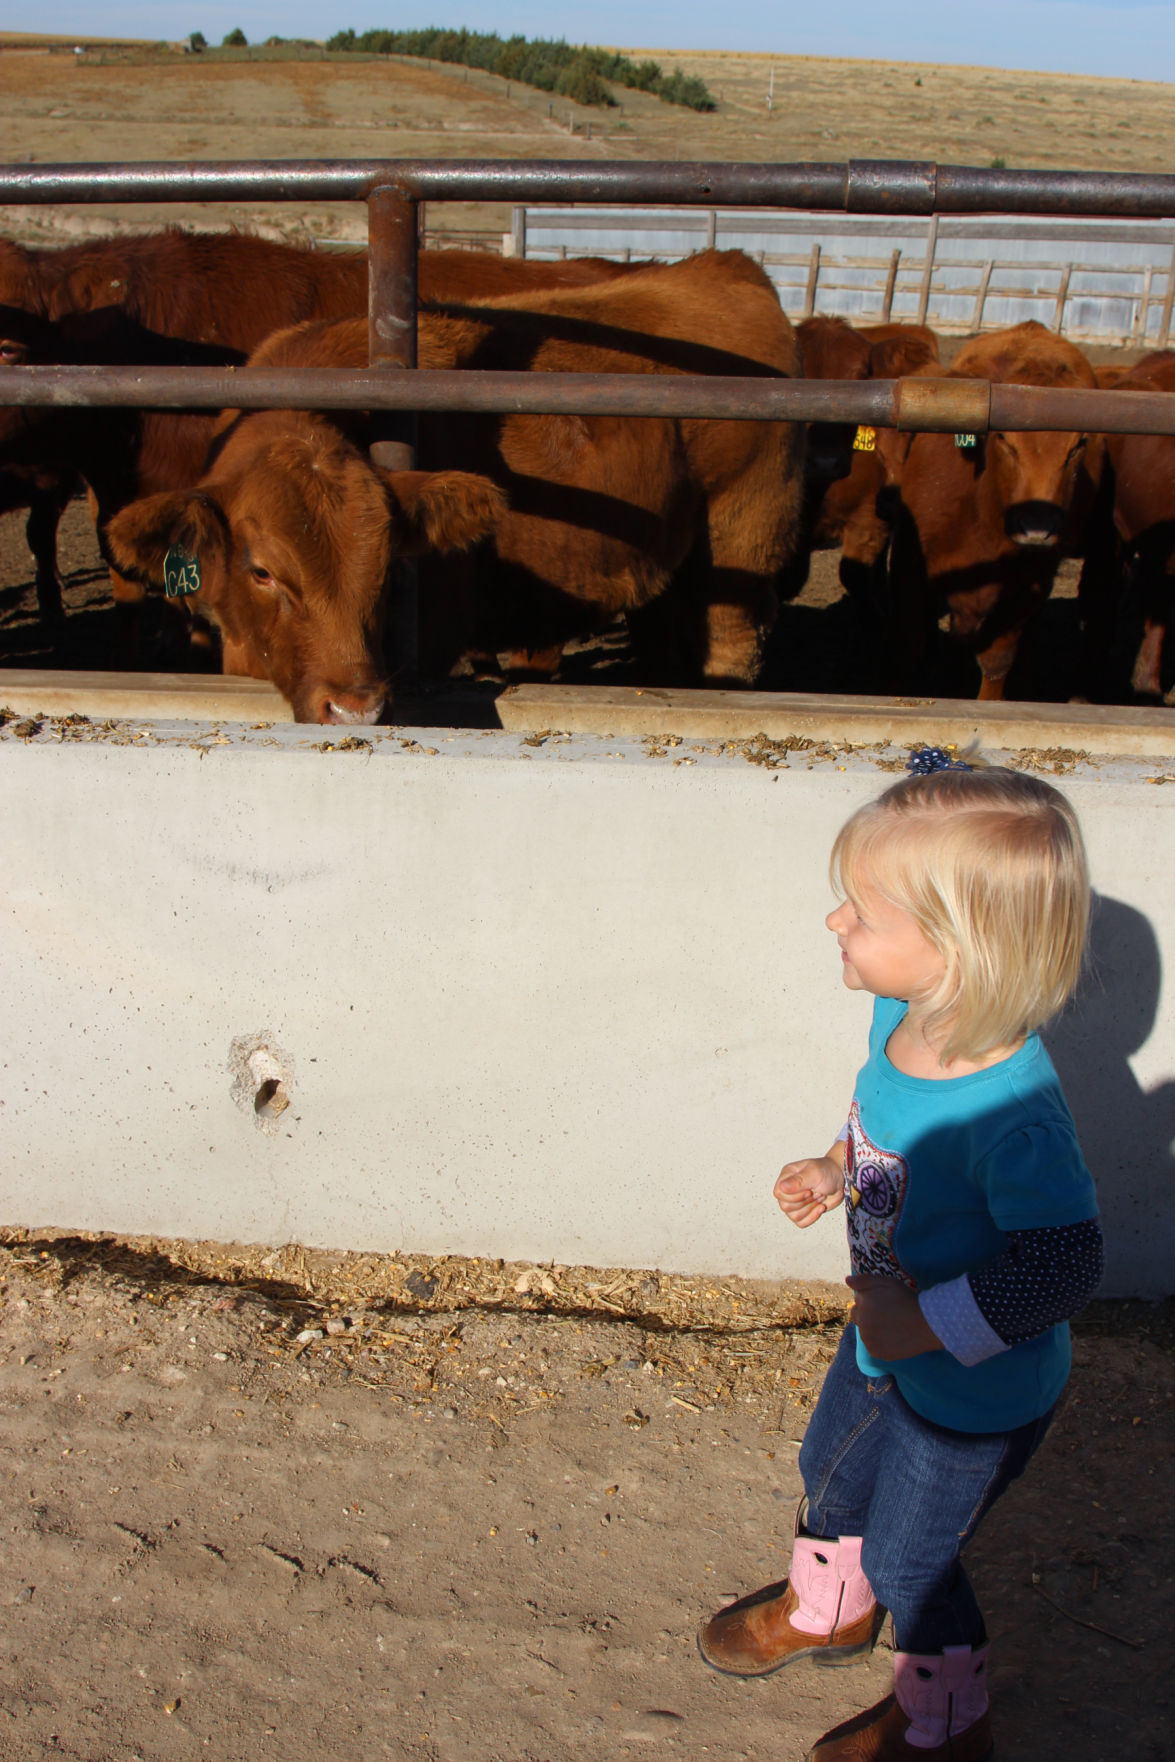 Macy Wasson, 2, likes to see the calves on feed at her family’s ranch, Prairie Dog Creek Cattle Co., Dresden, Kansas. This one was a family project that went to the county fair with her older brother Mitchell and older sister Michaela. Their parents Michael and Kelly Wasson say they feel blessed to have the opportunity to raise their children in a rural environment and around livestock, just like they were raised. (Journal photo by Jennifer M. Latzke.)